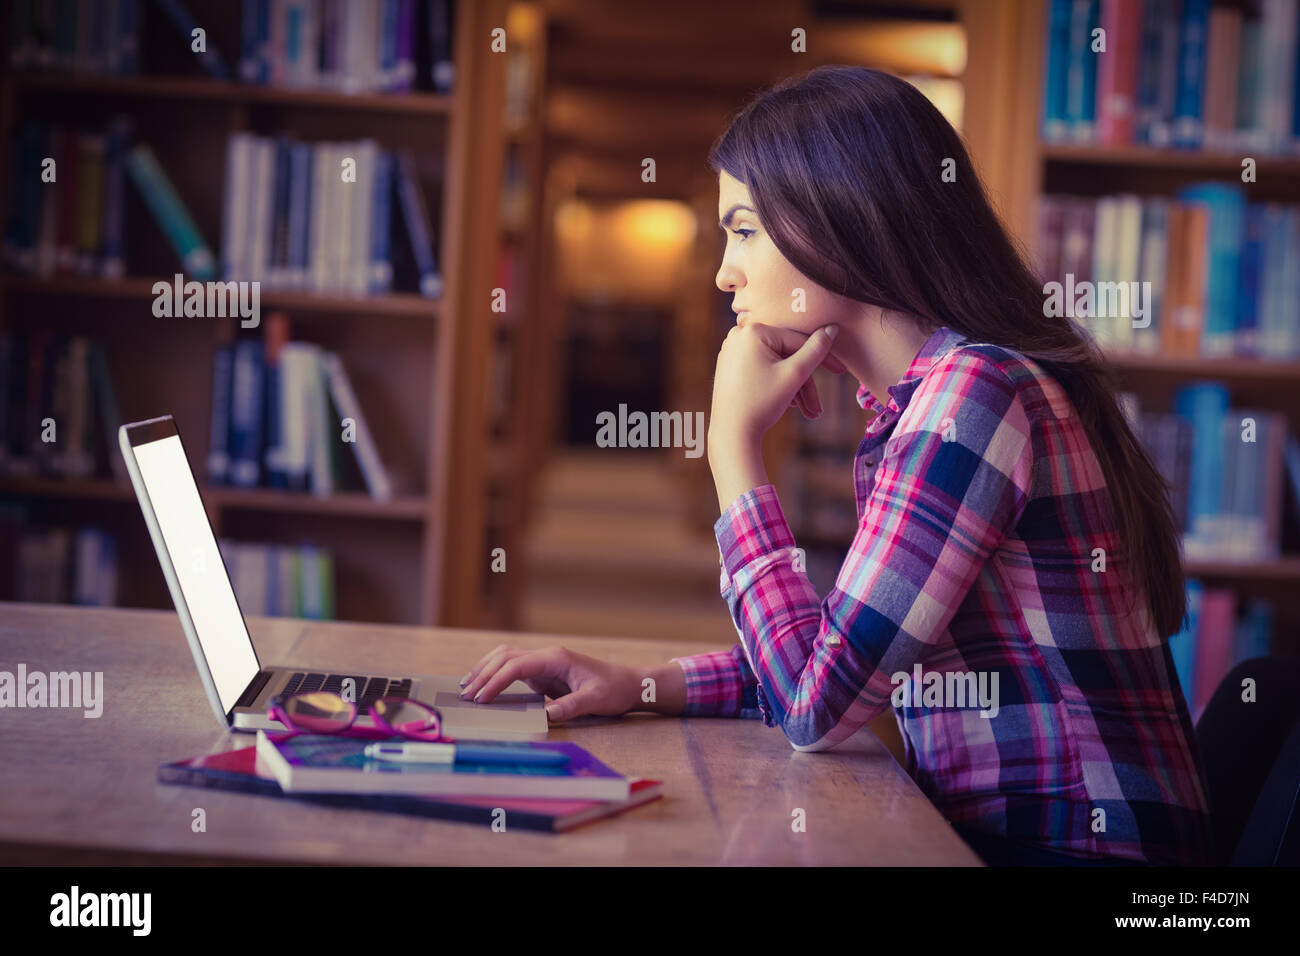 Concentrated female student working on laptop Stock Photo